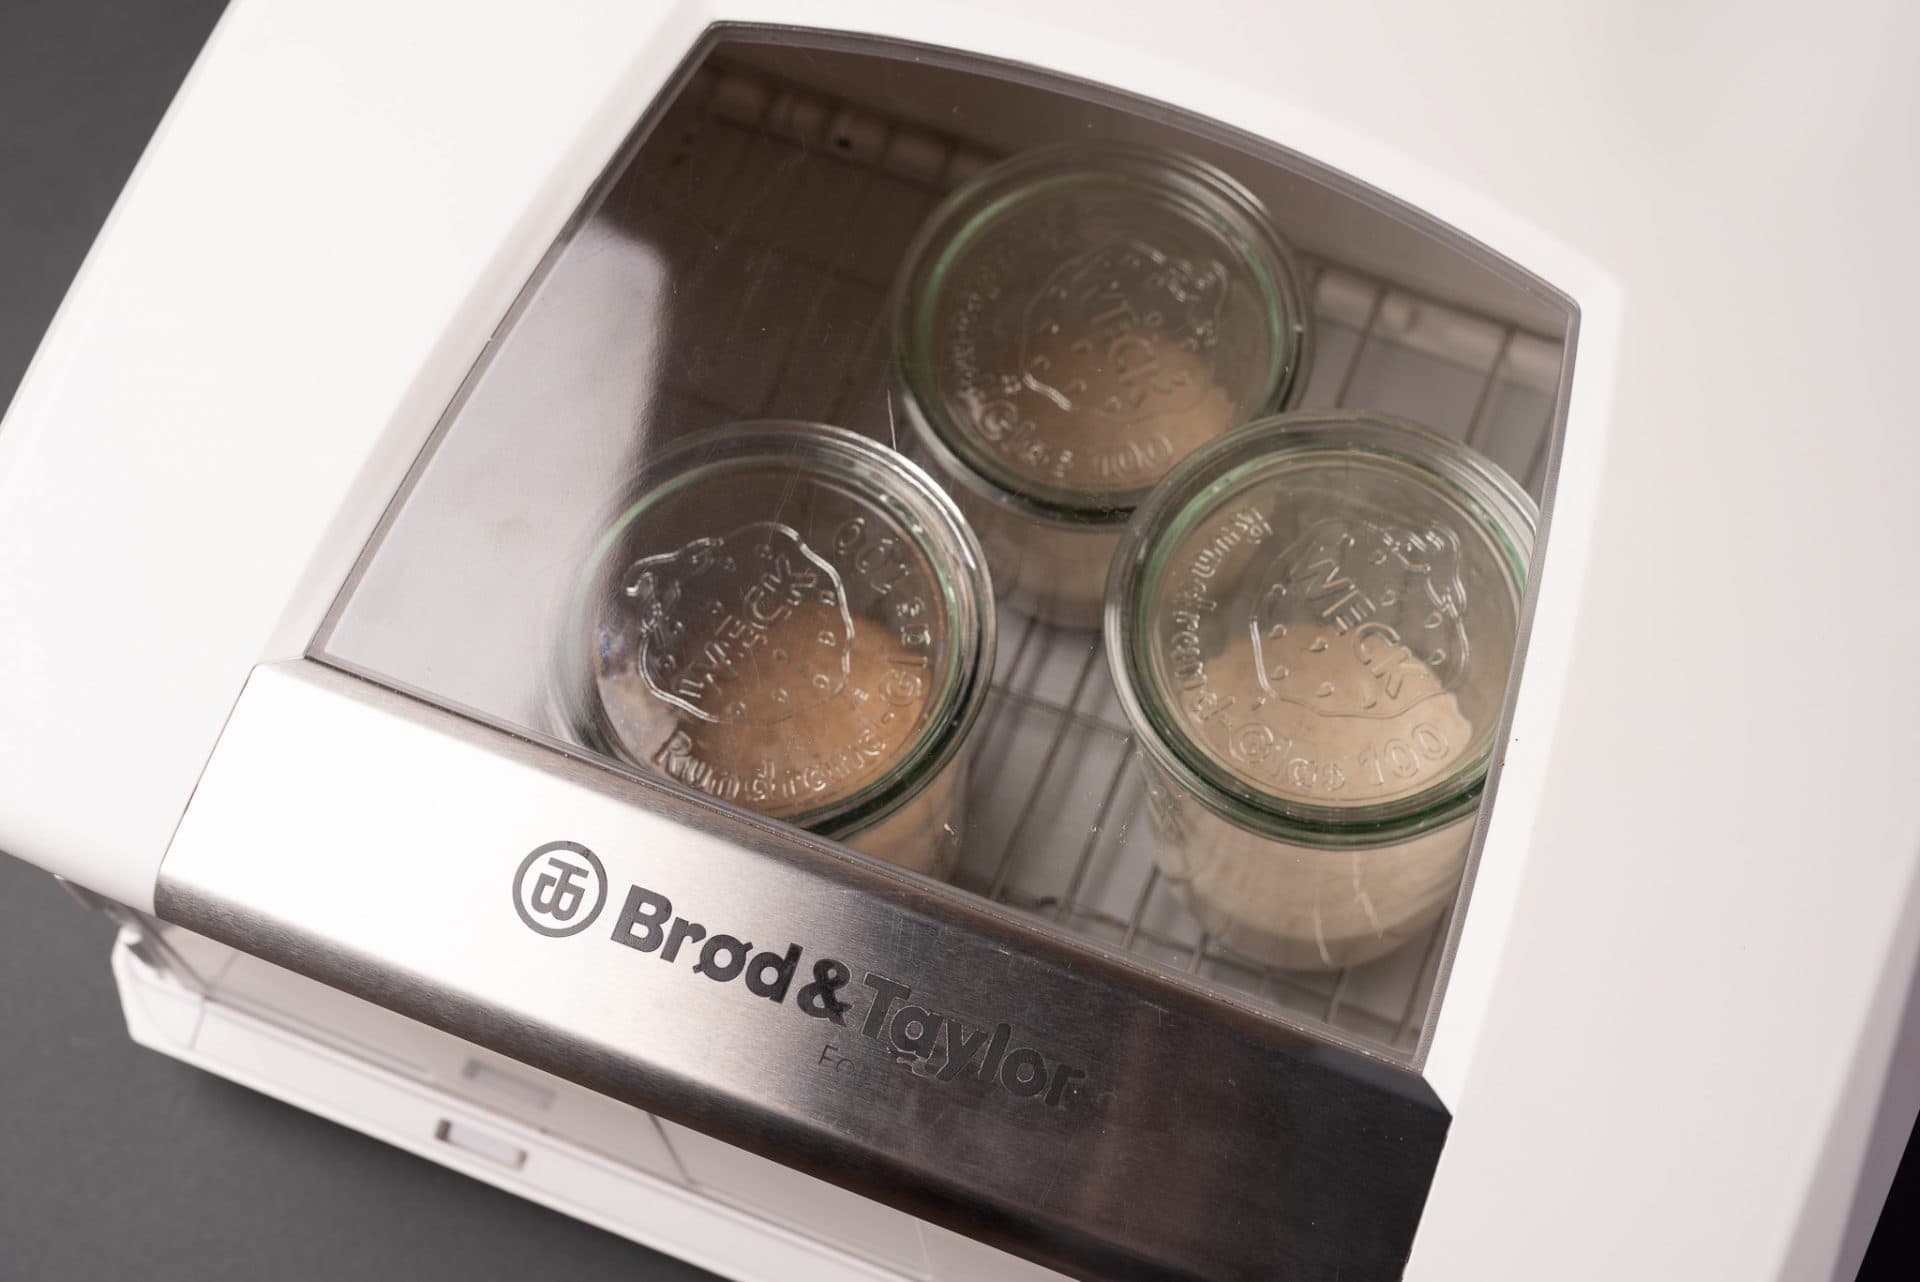 https://www.theperfectloaf.com/wp-content/uploads/2021/01/theperfectloaf-how-to-use-brod-and-taylor-dough-proofer-7-1920x1282.jpg